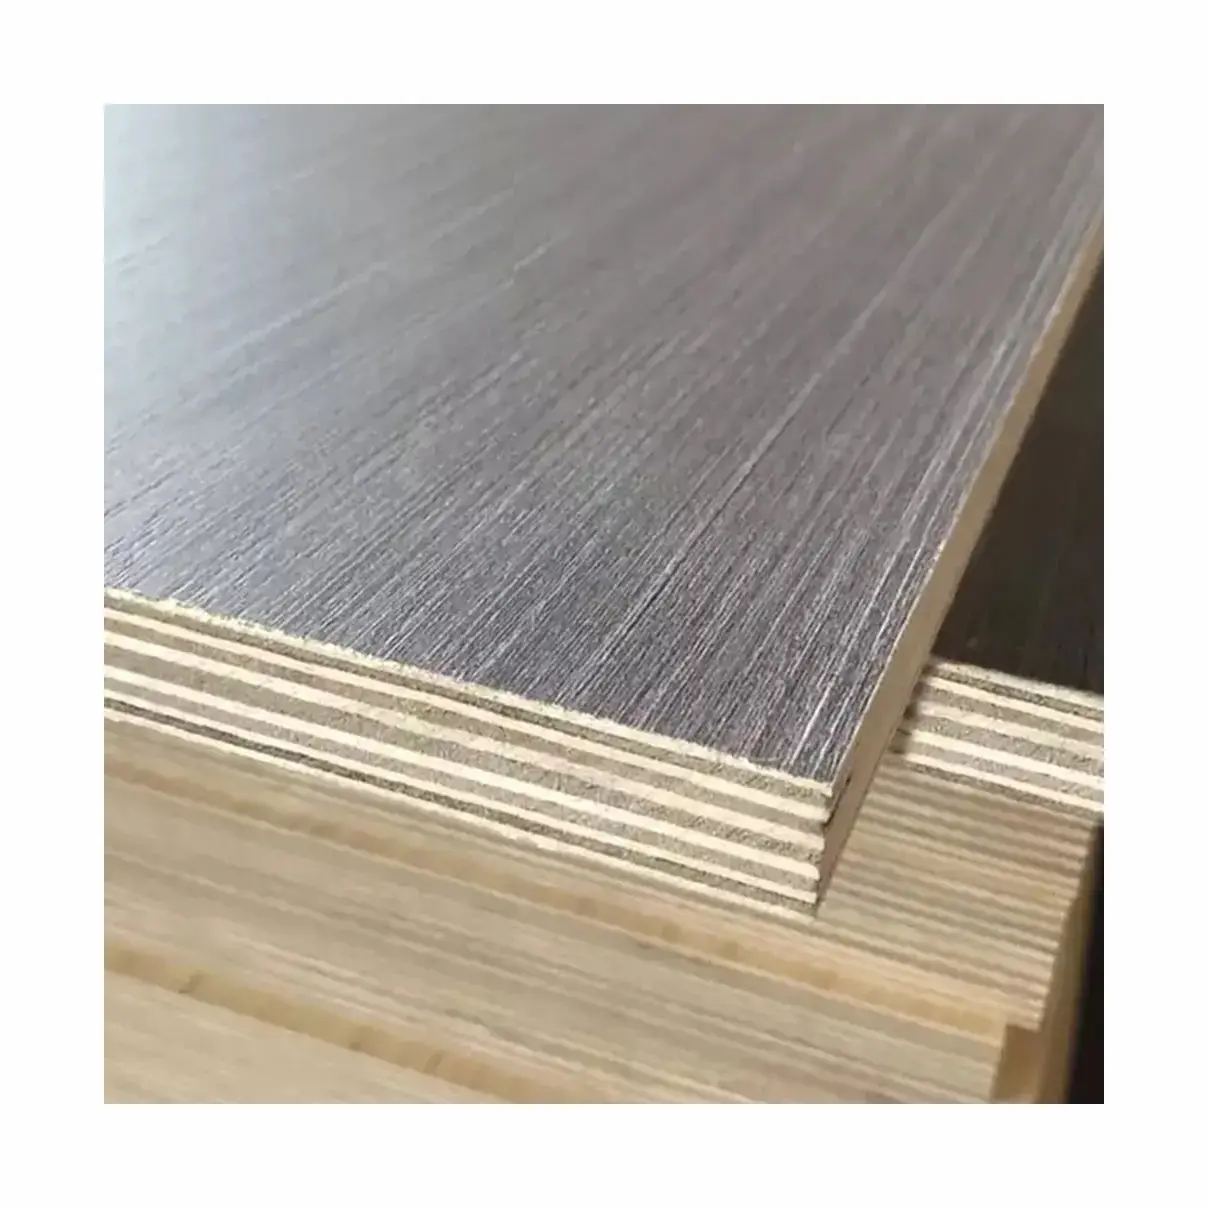 Commercial Ply Construction Board Birch Marine Laminated Plywood Sheet 18mm pine/birch/ Plywood wood plywood sheet 4x8 laminated